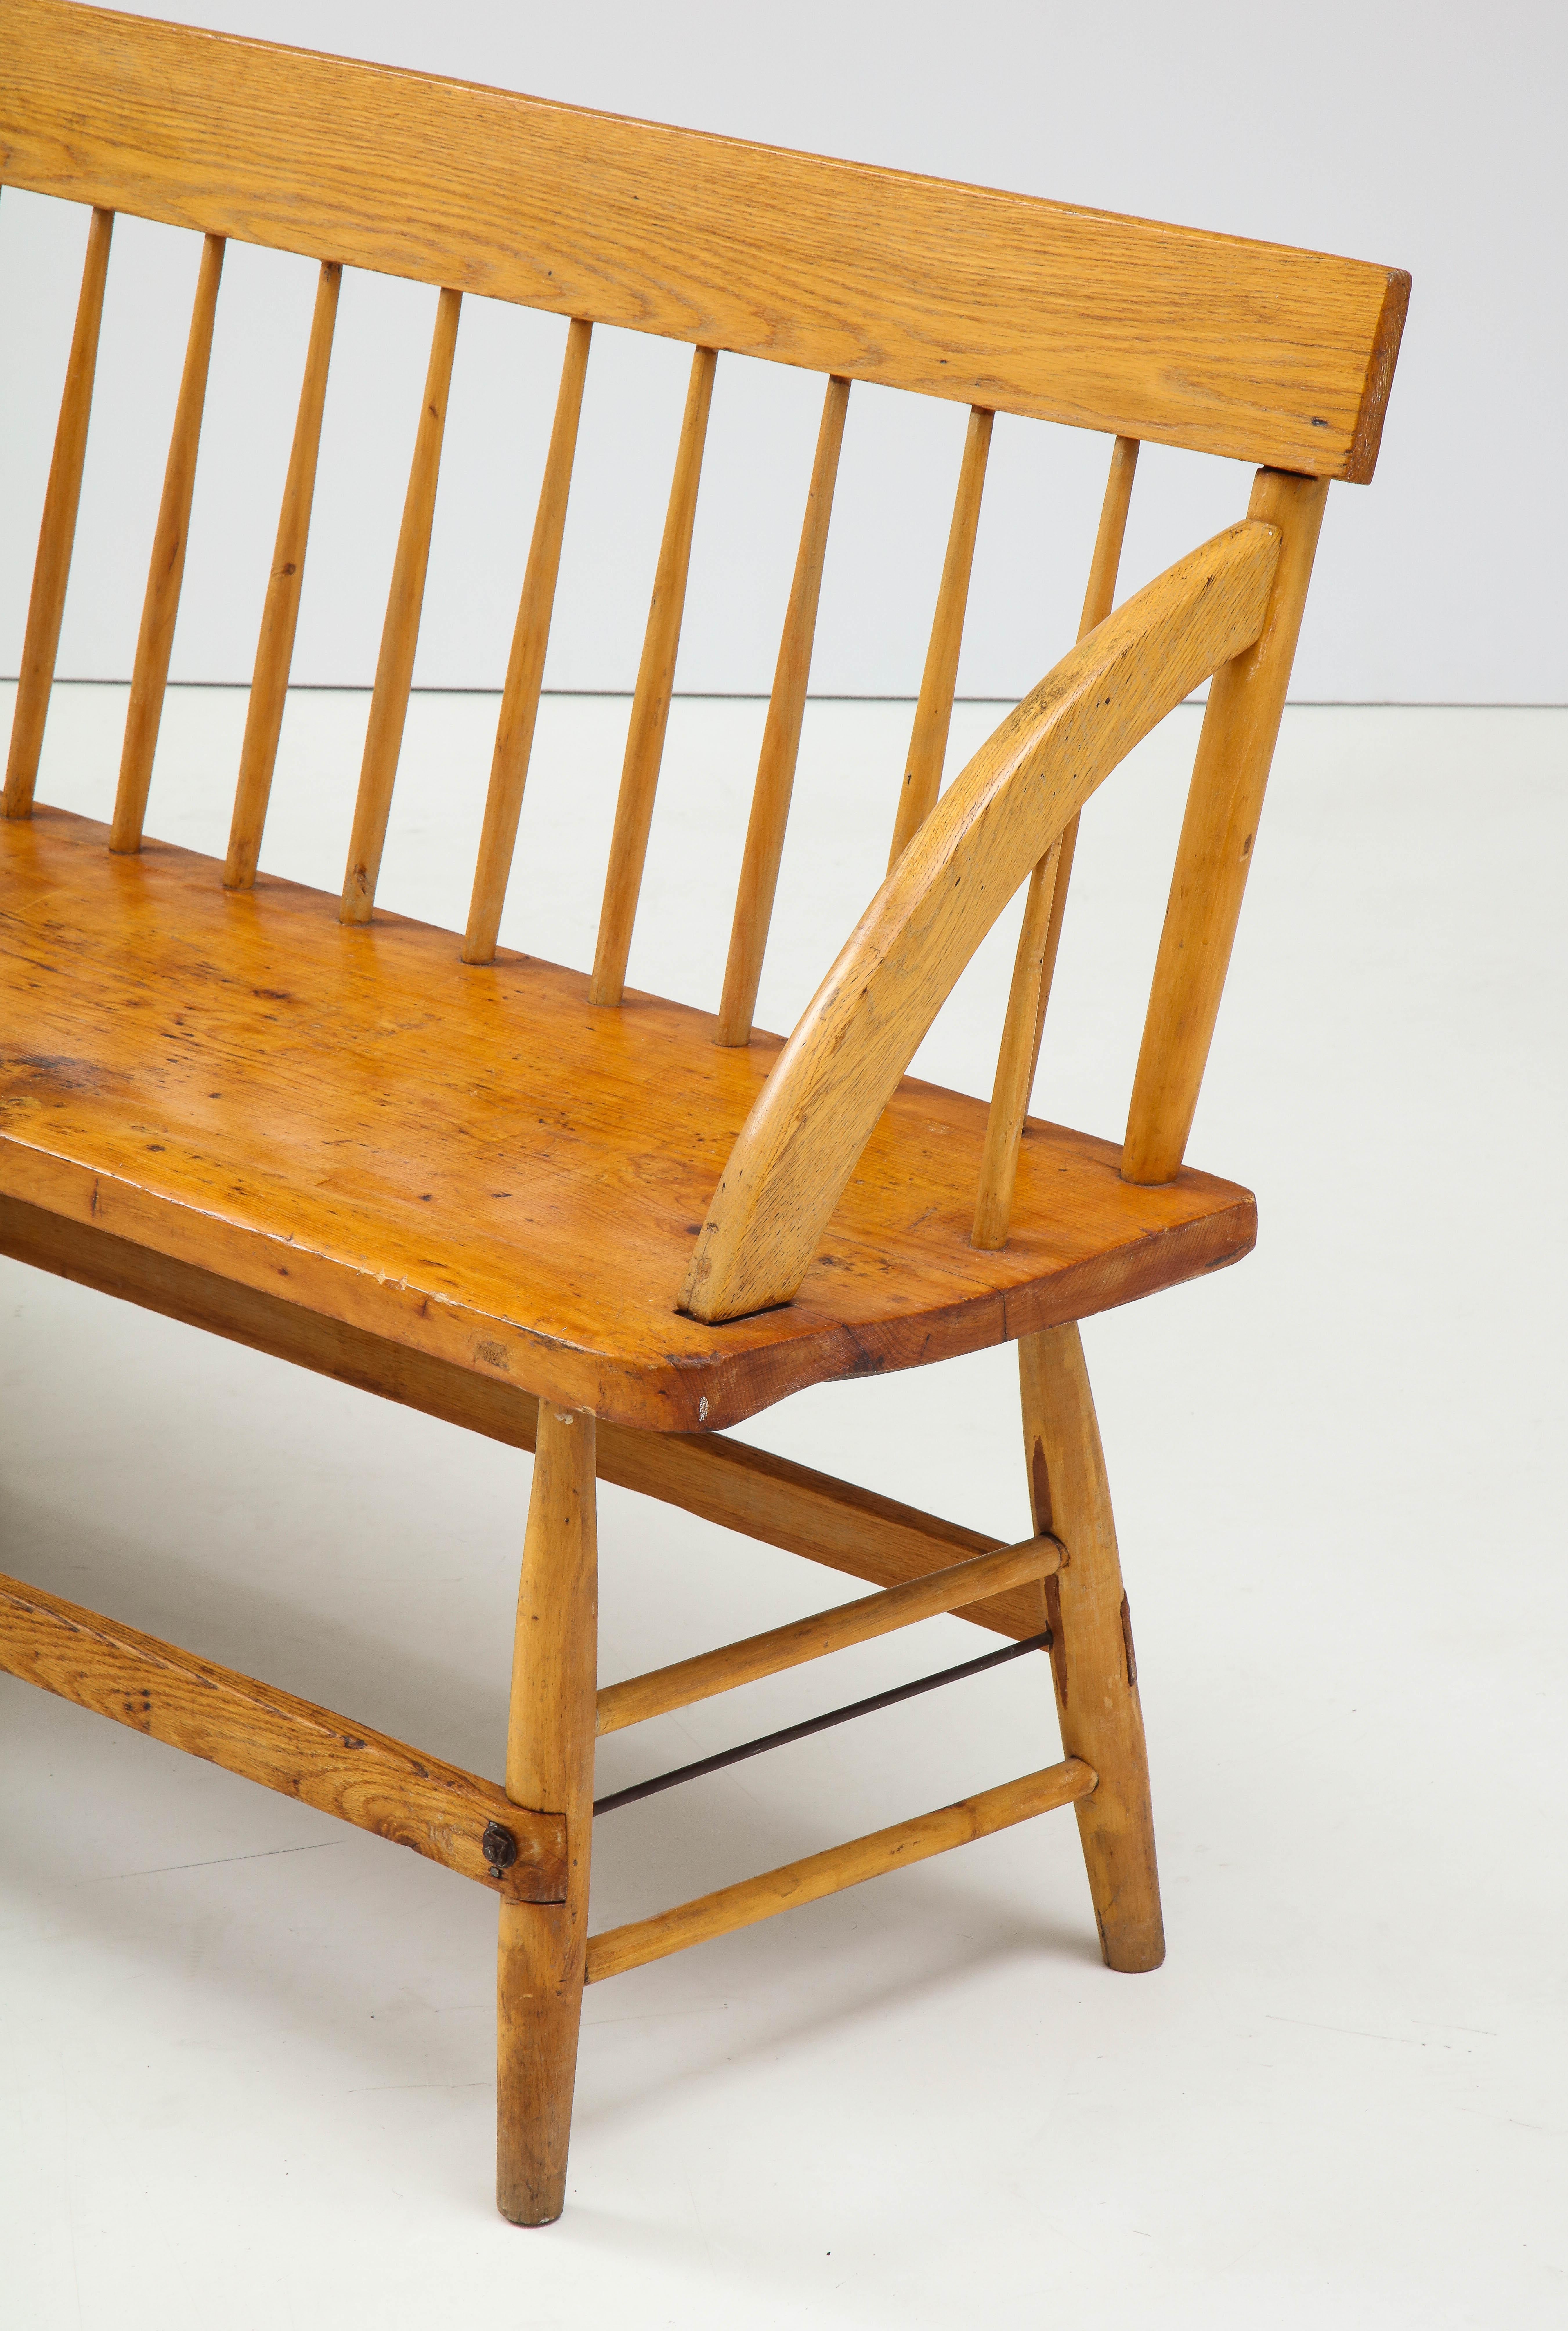 19th Century Exceptional 19th C. Hand Made Quaker Meeting House Bench, New England/Cape Cod